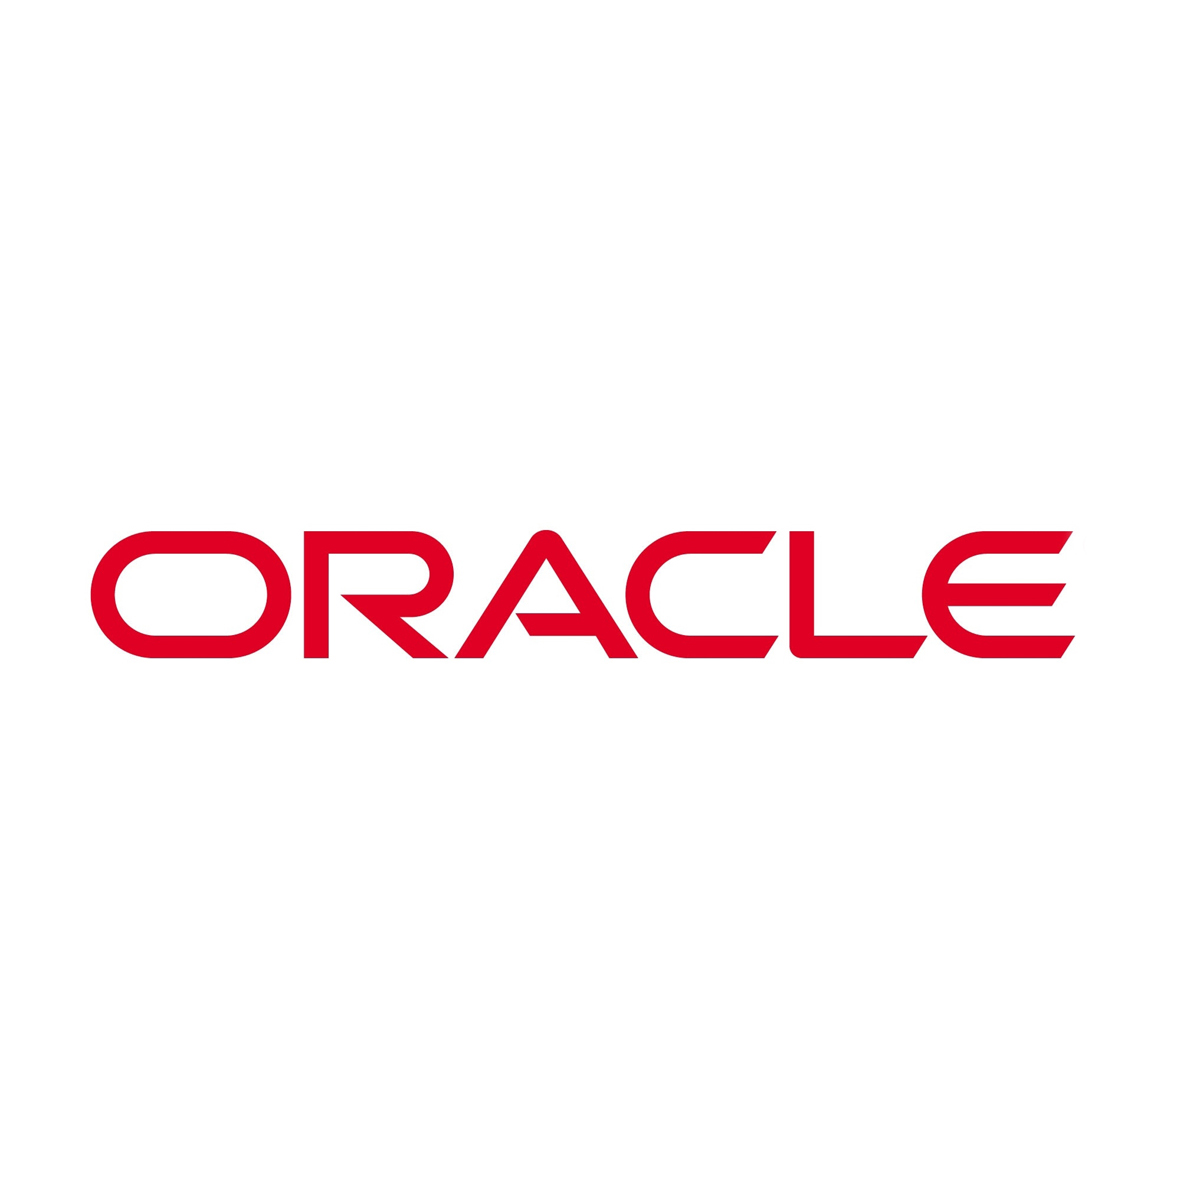  Leading Cloud CRM Software Logo: Oracle